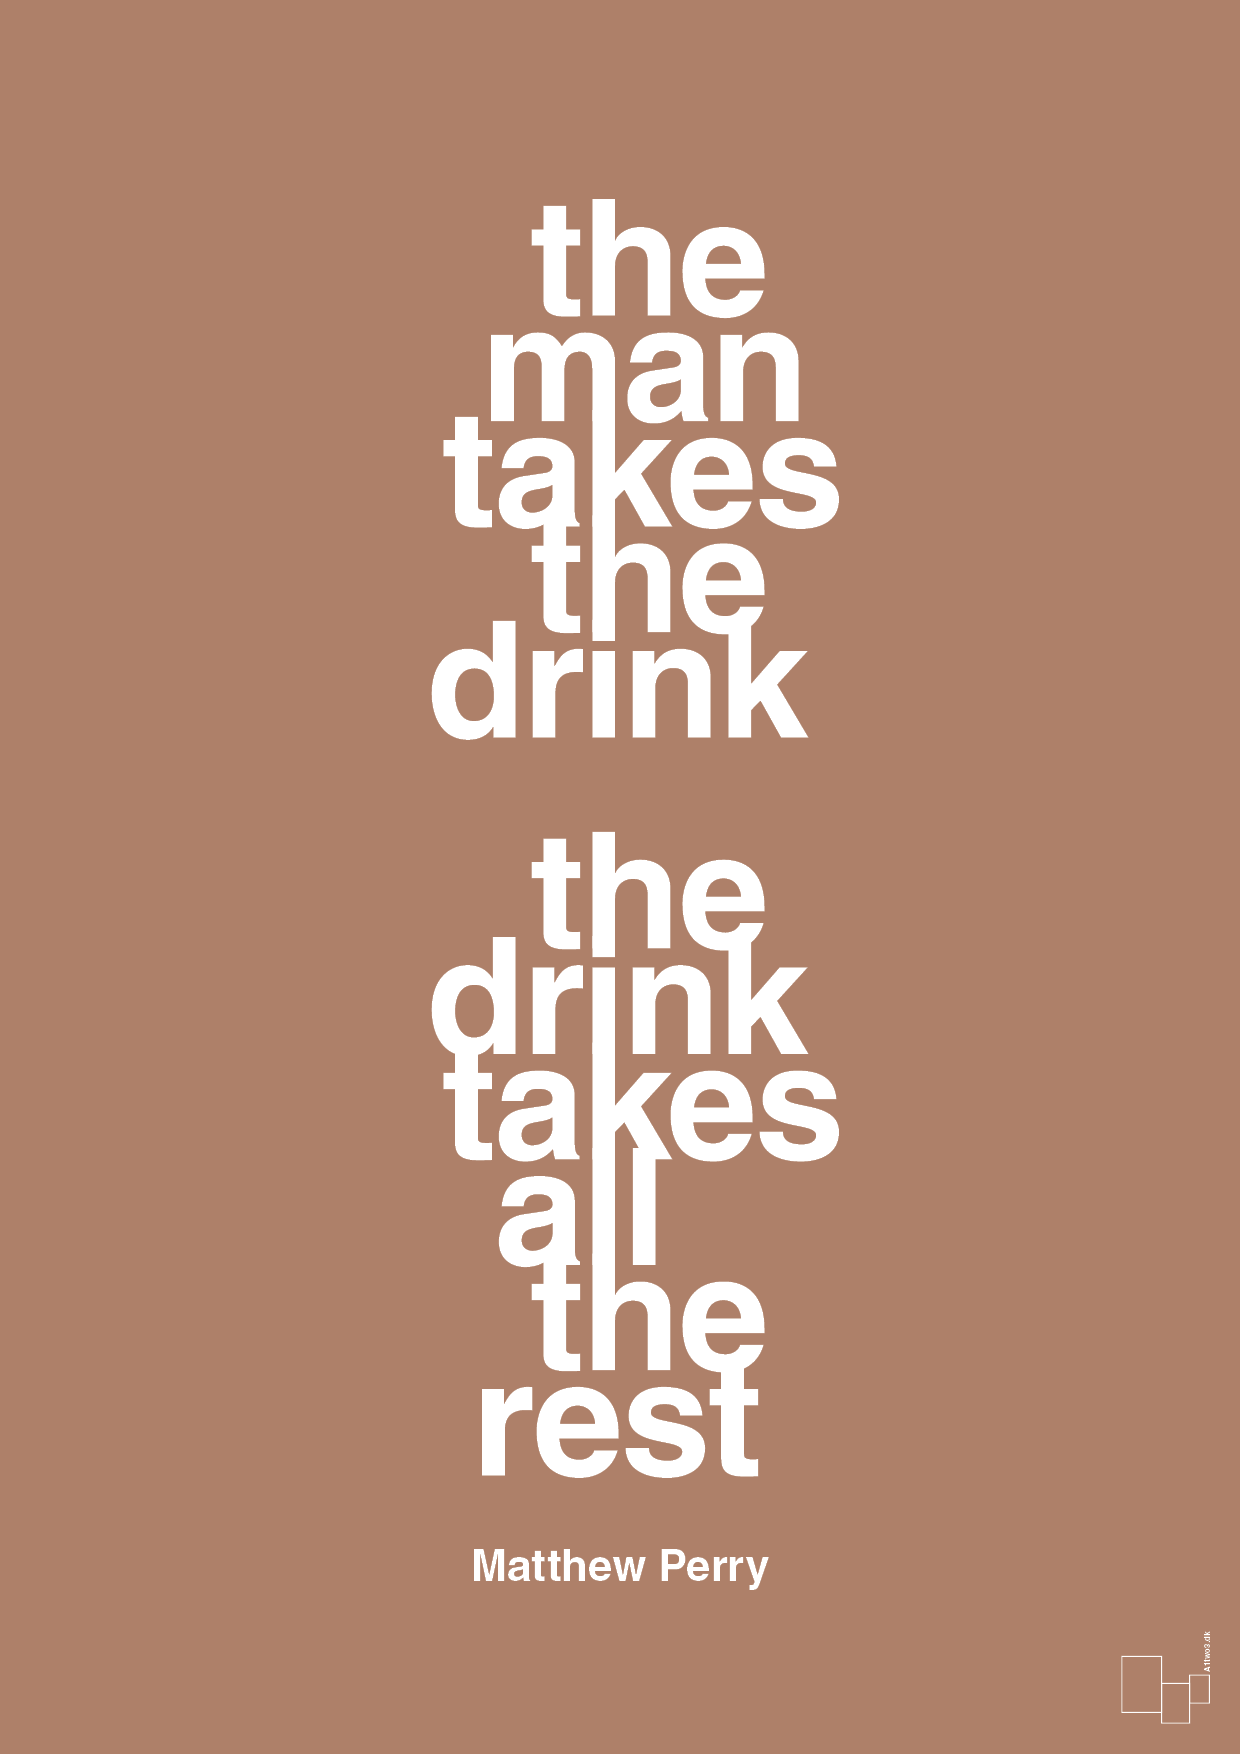 the man takes the drink the drink takes all the rest - Plakat med Citater i Cider Spice